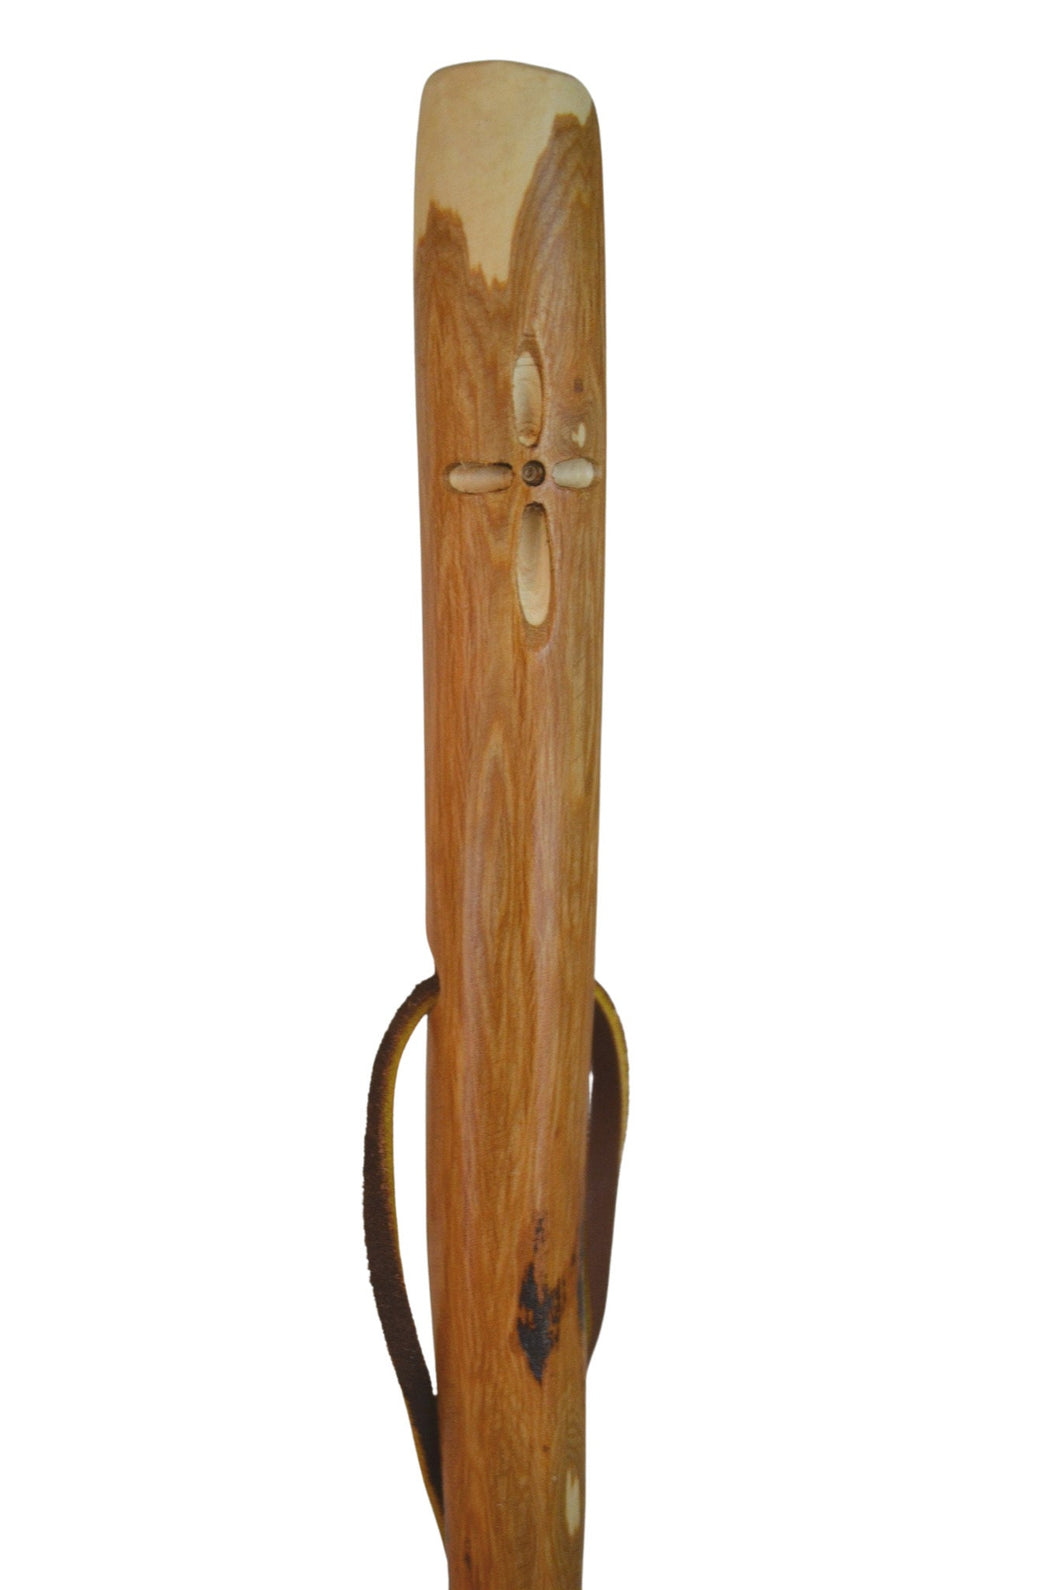 Hickory Walking Stick with Cross Carving. Christian Walking Stick